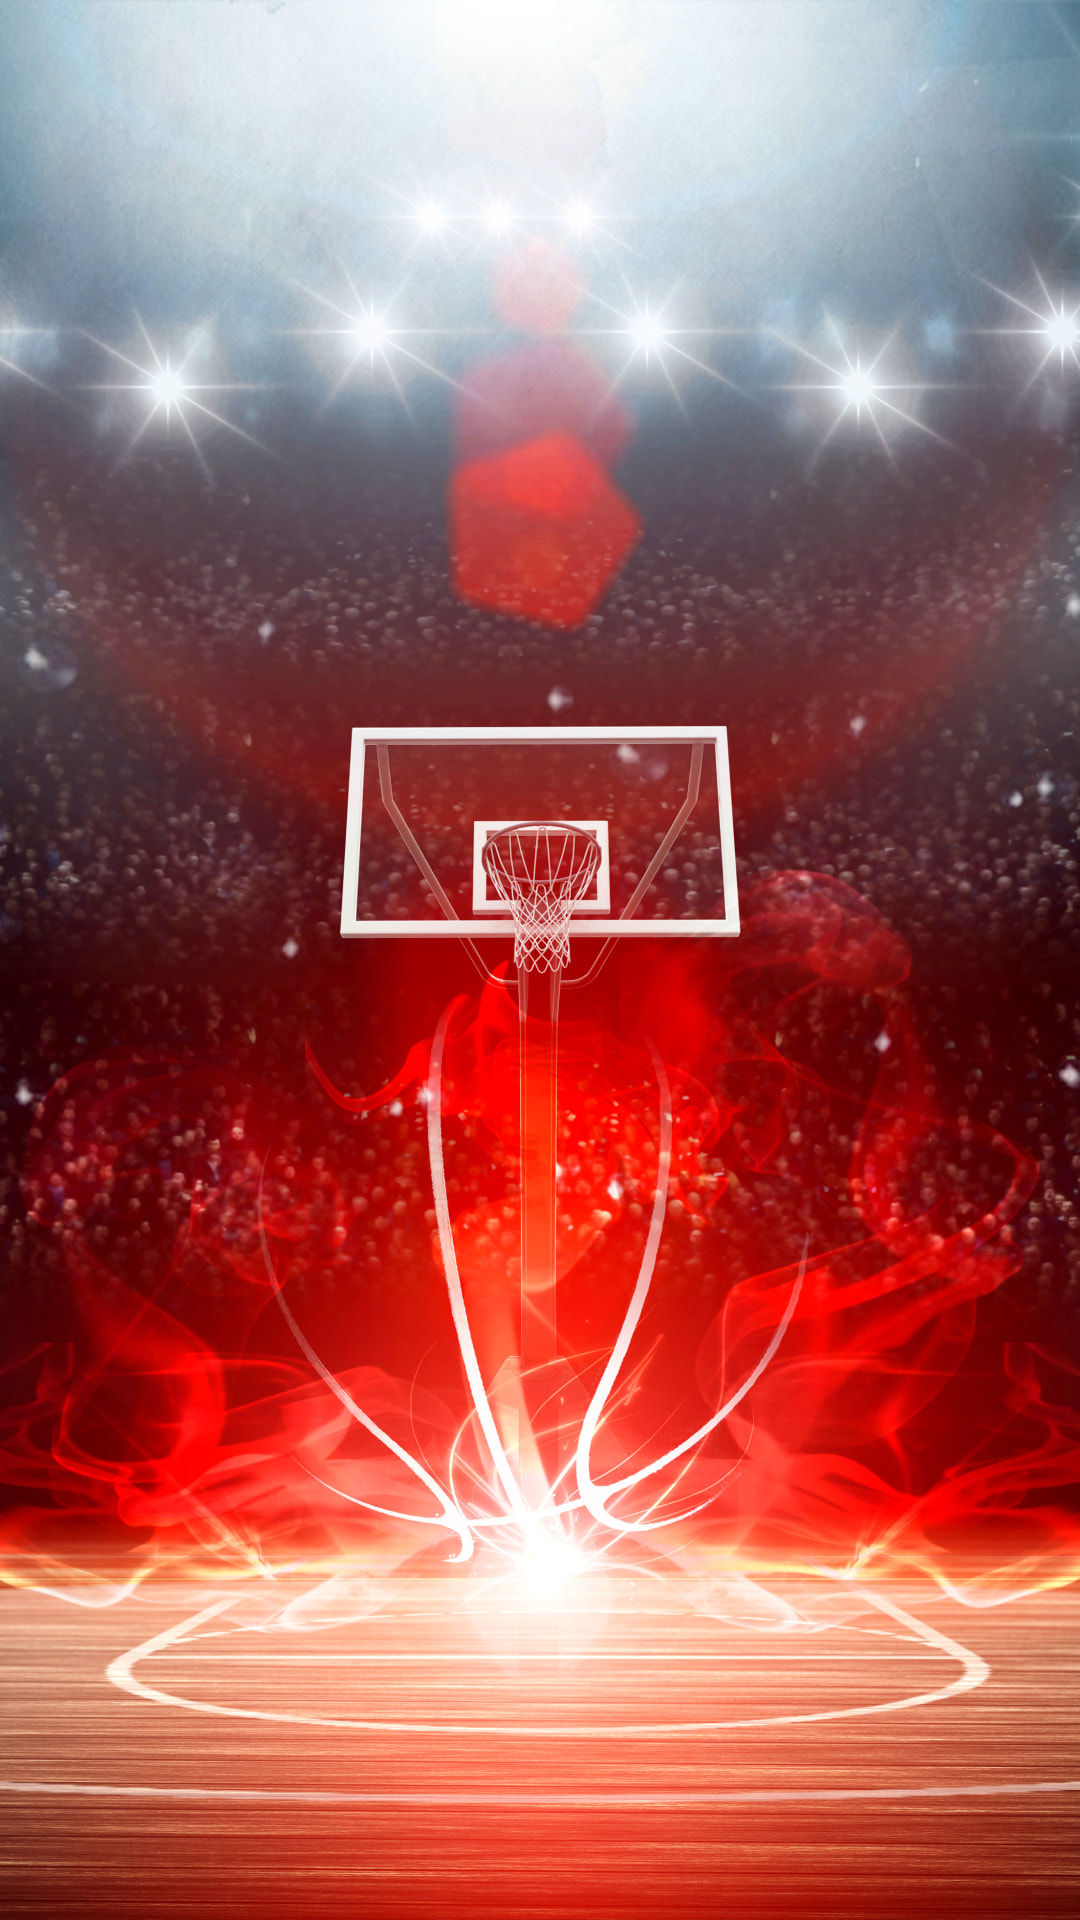 Cool Basketball Wallpaper For iPhone Xr